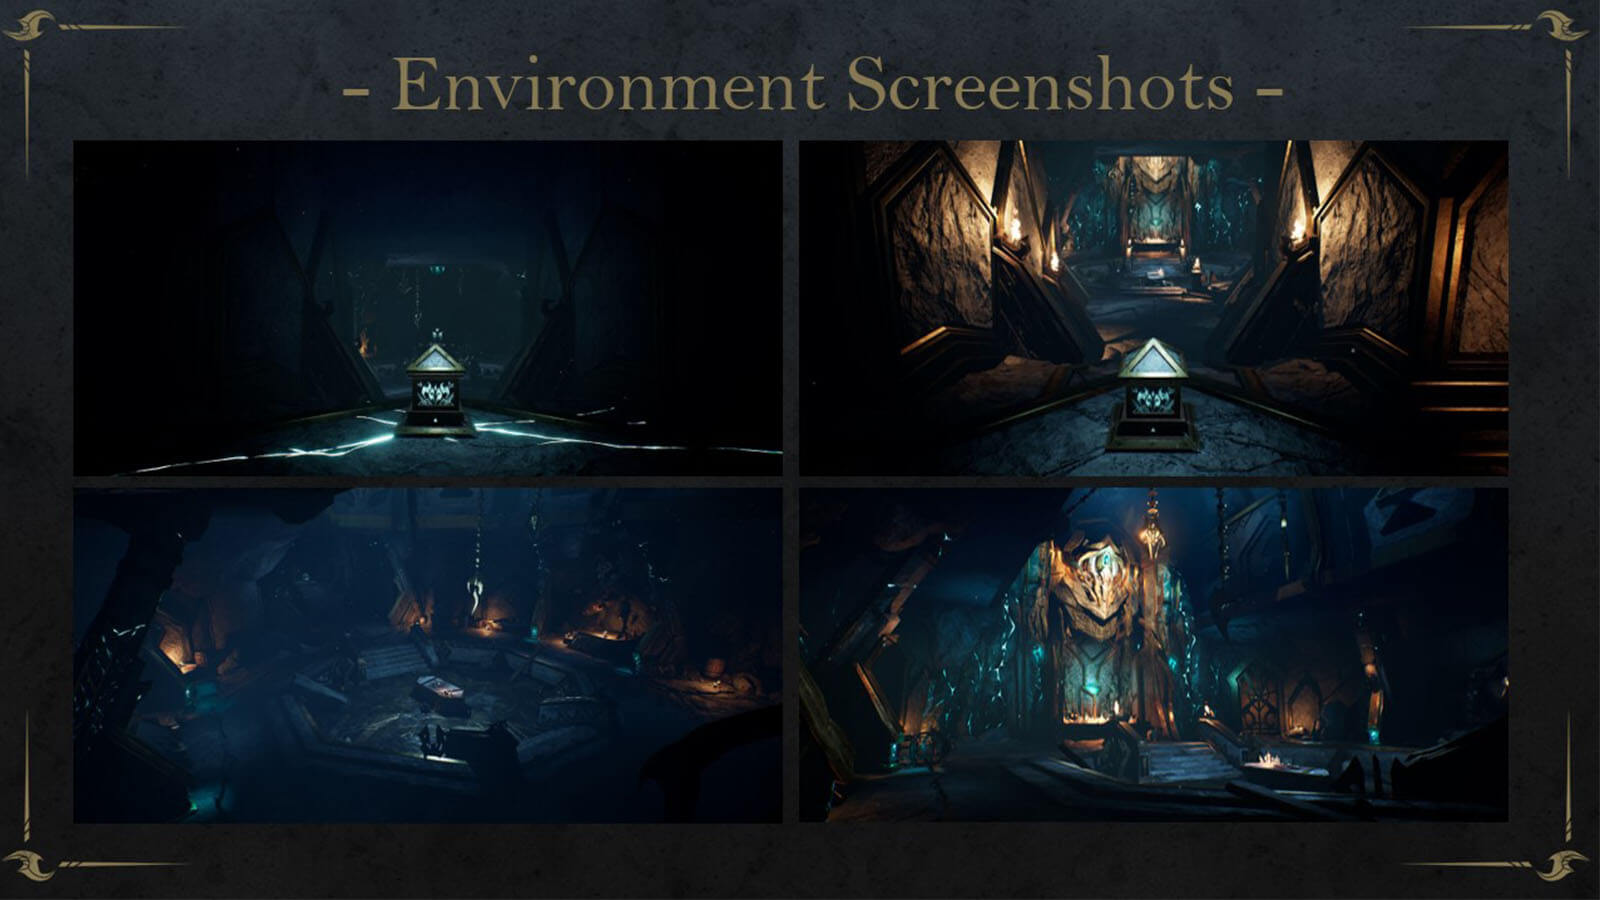 Still image depicting four separate environment screenshots of a dungeon's inner chamber